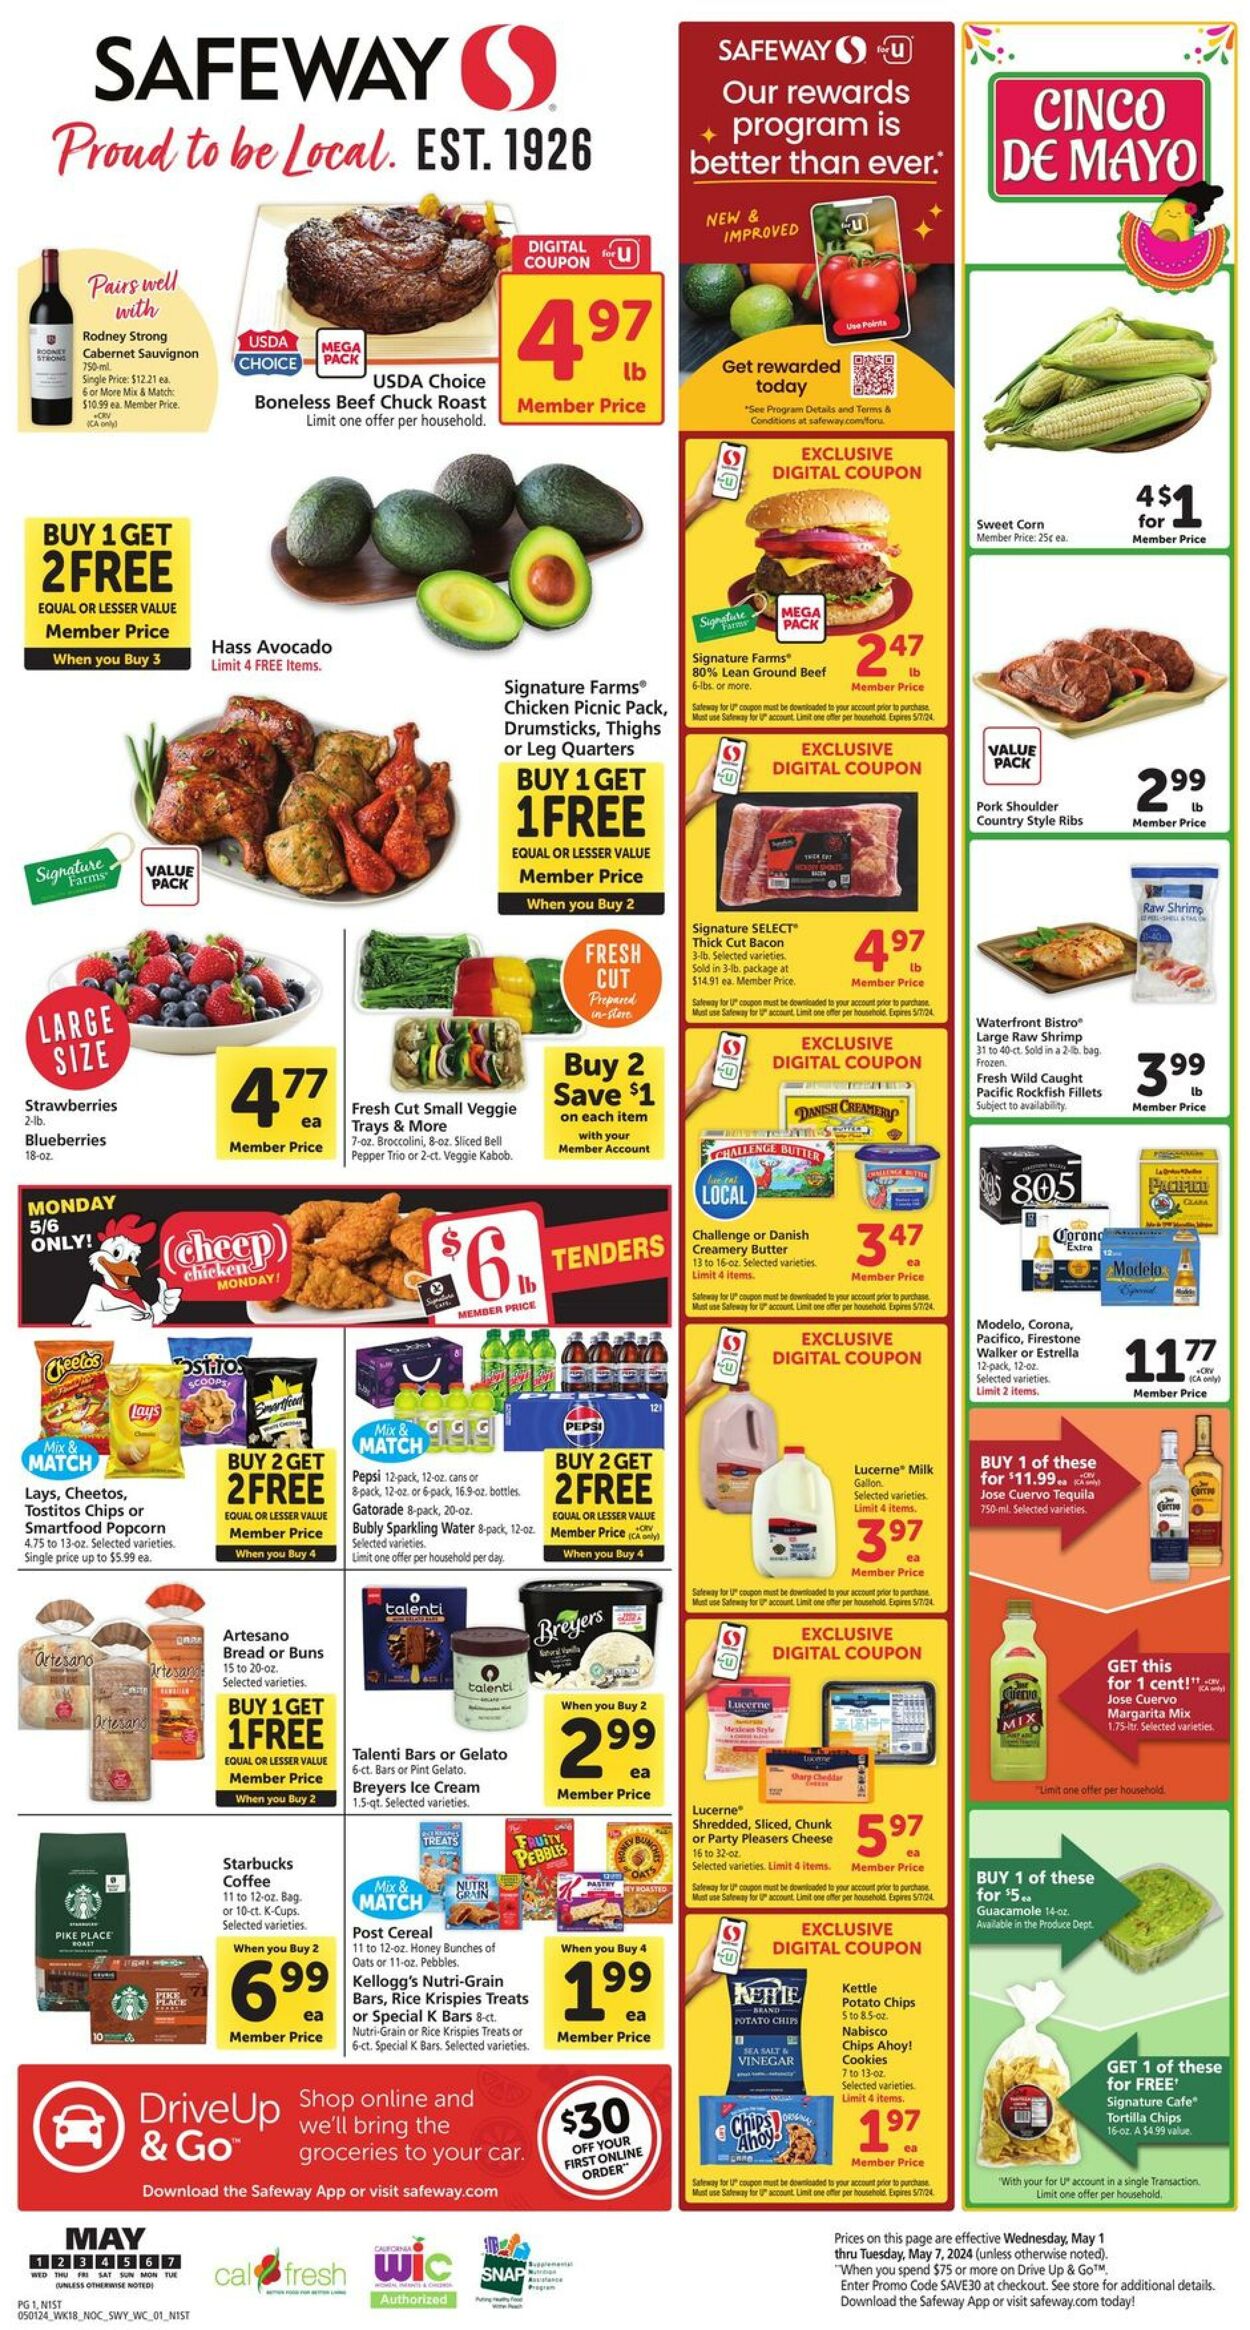 Safeway Promotional weekly ads